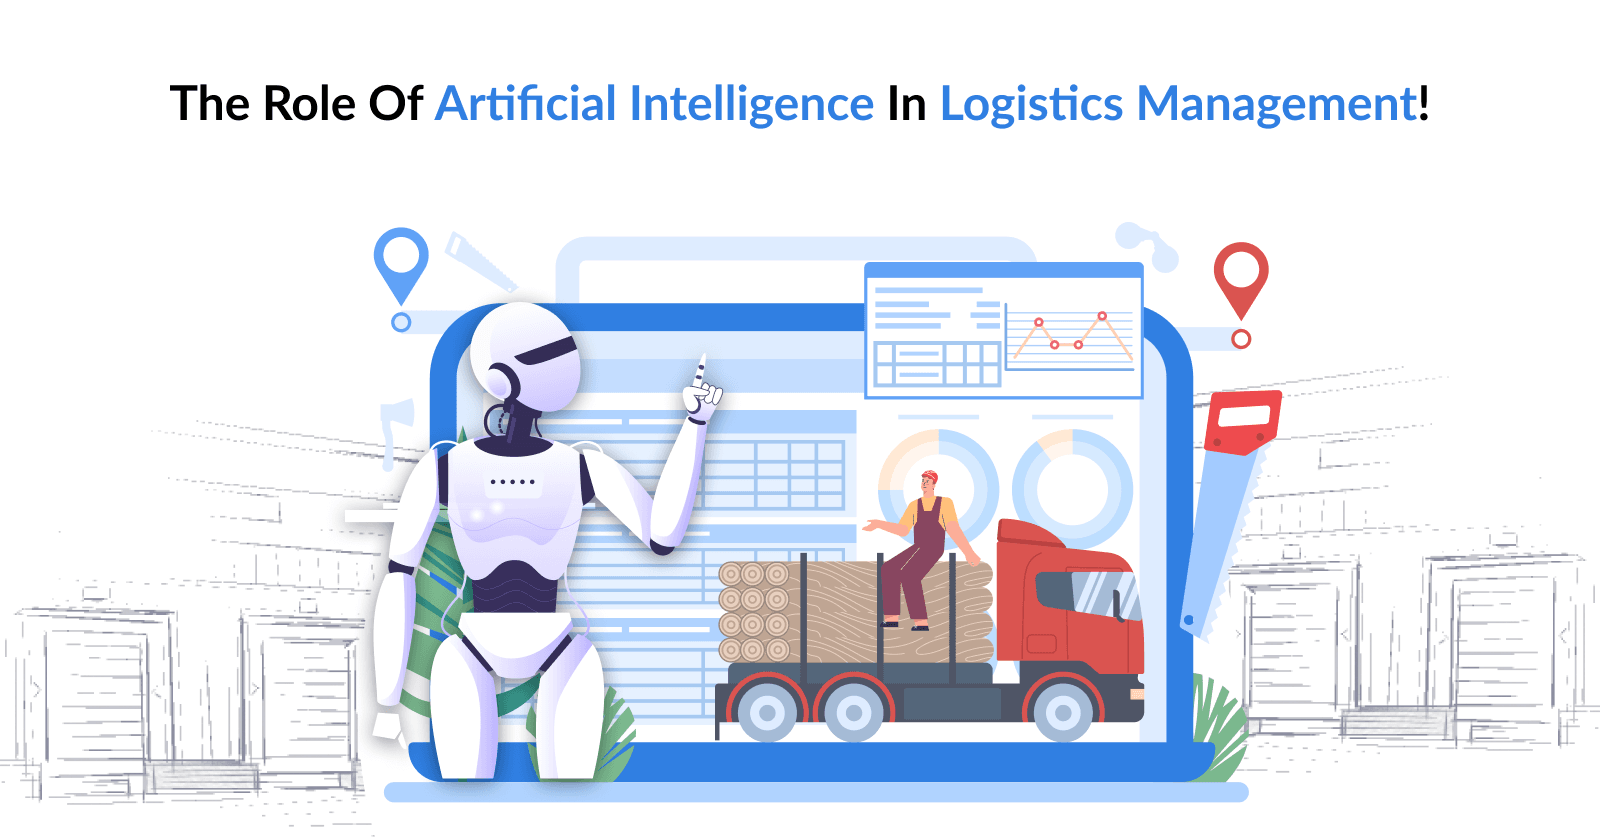 The Role of Artificial Intelligence in Logistics Management!